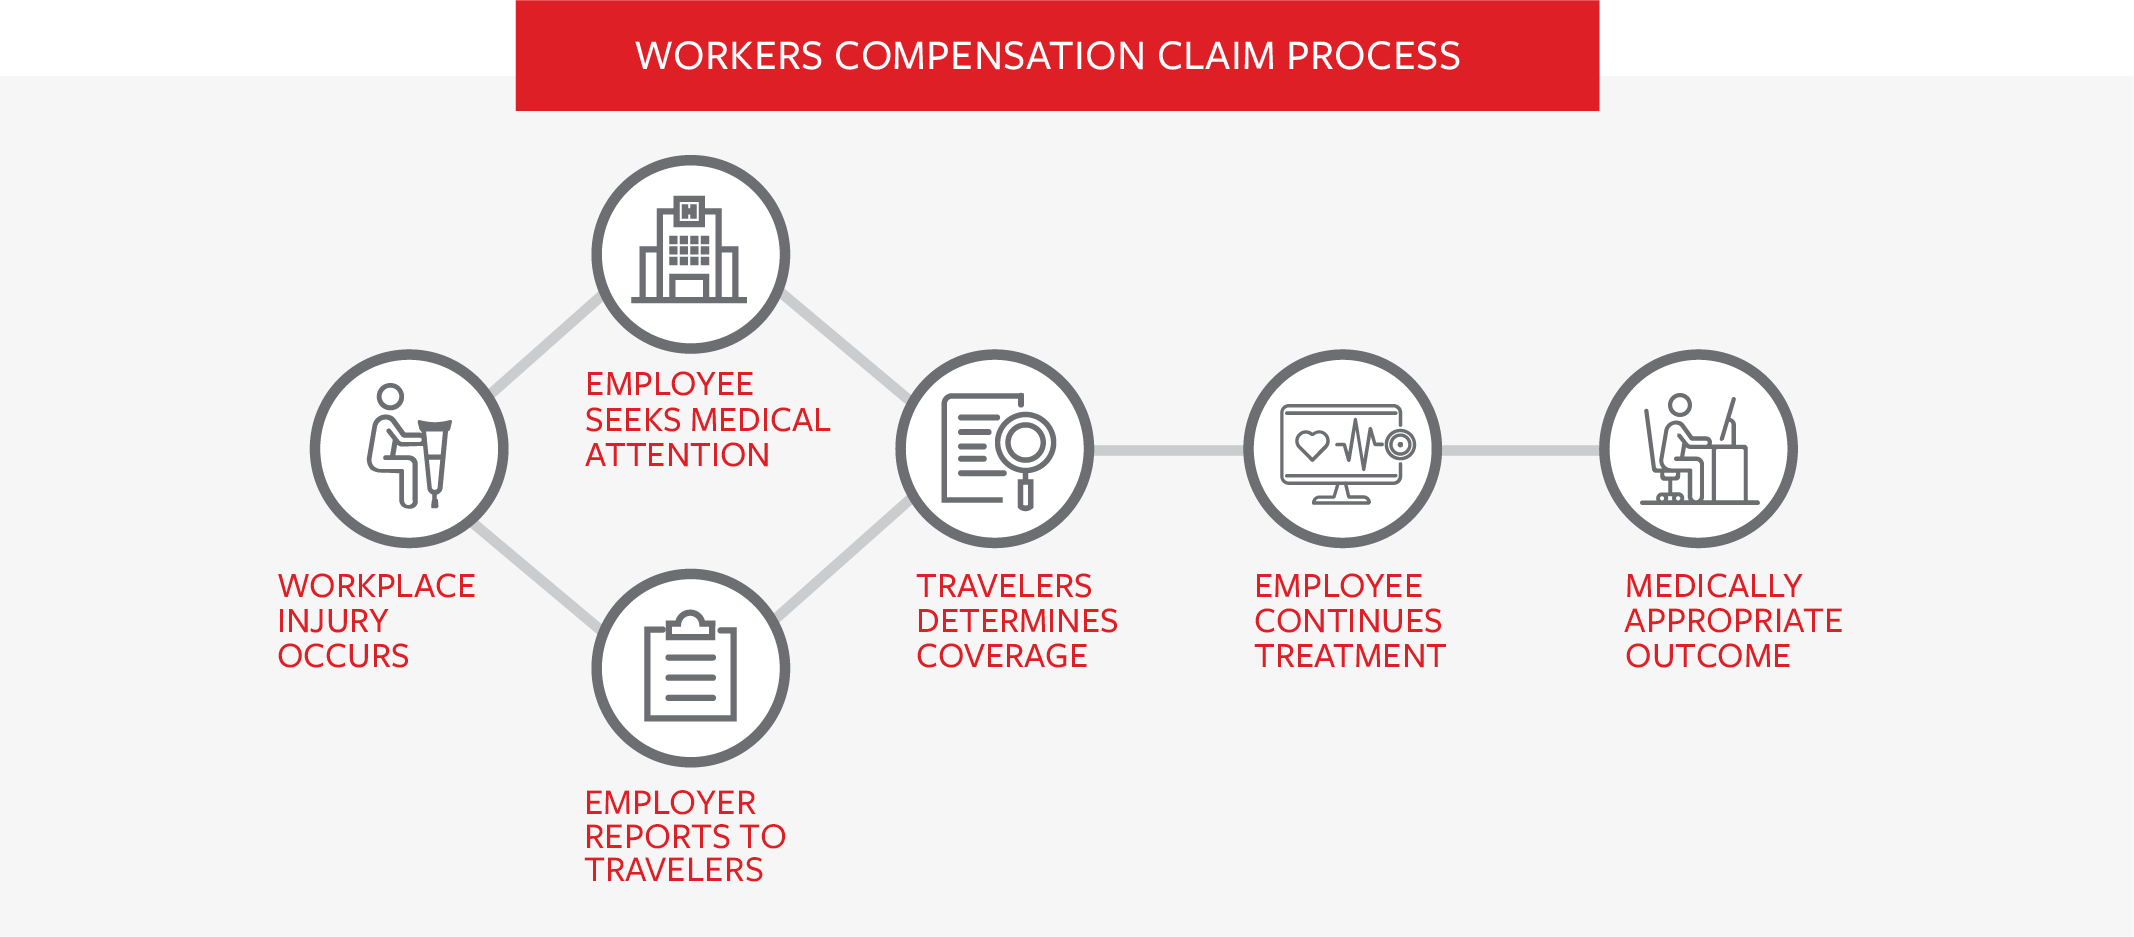 WORKERS COMPENSATION CLAIM PROCESS – Workplace Injury Occurs – Employee Seeks Medical Attention – Employer Reports To Travelers – Travelers Determines Coverage – Employee Continues Treatment – Medically Appropriate Outcome